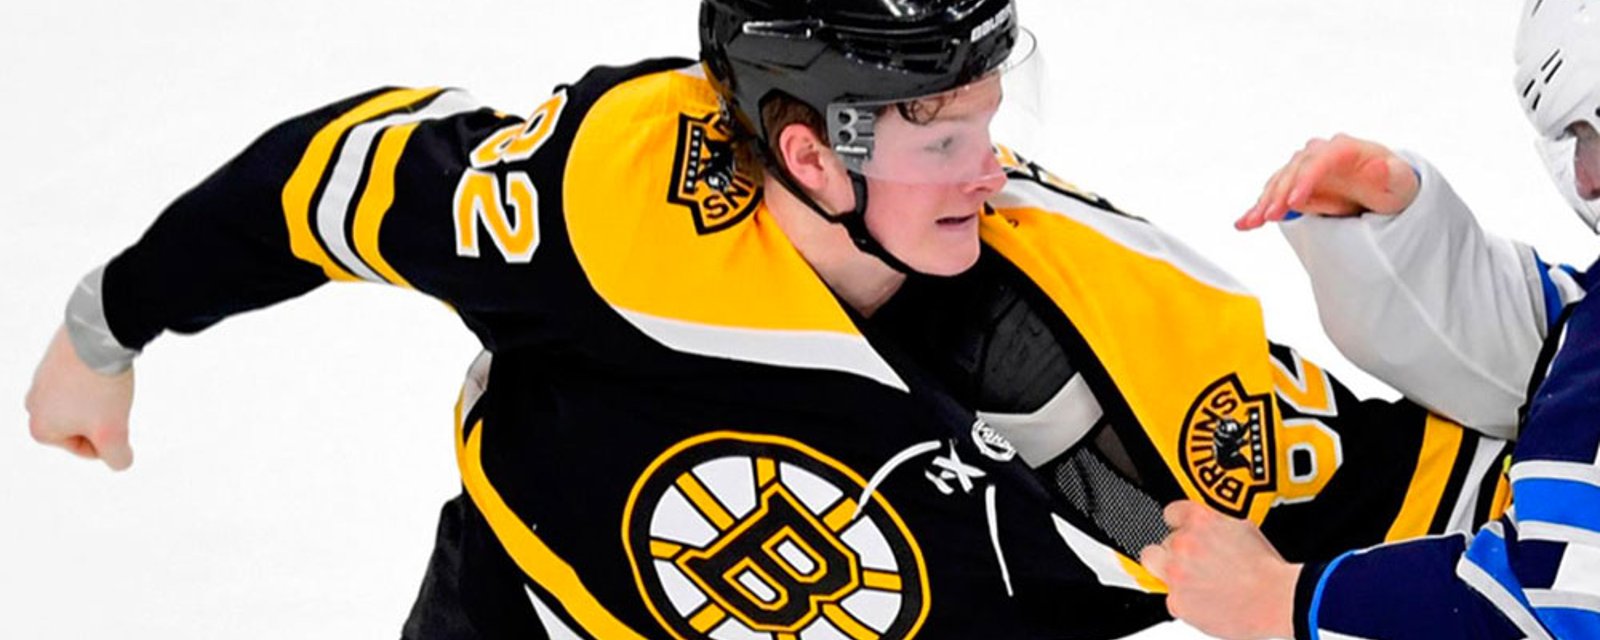 Bruins fans are not happy with Trent Frederic following arbitration filings